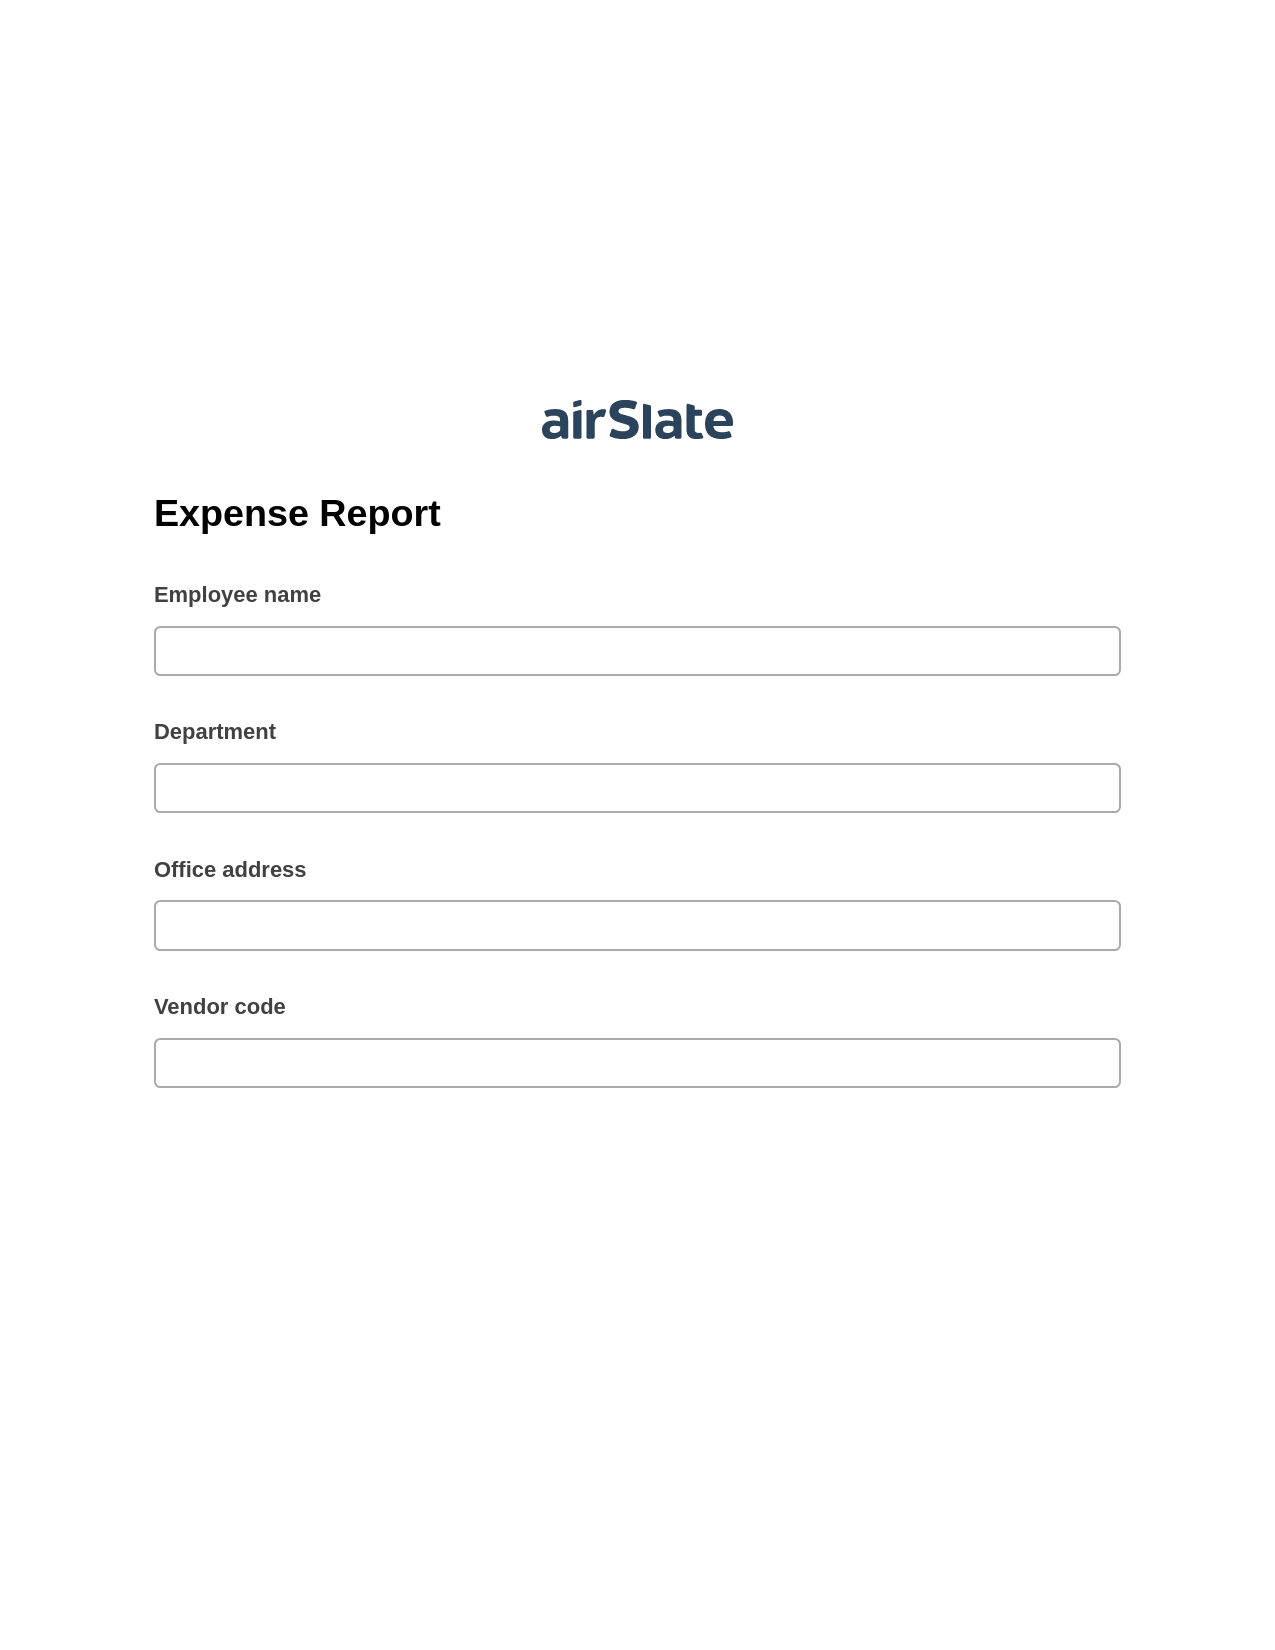 Multirole Expense Report Pre-fill from CSV File Bot, Create MS Dynamics 365 Records Bot, Google Drive Bot